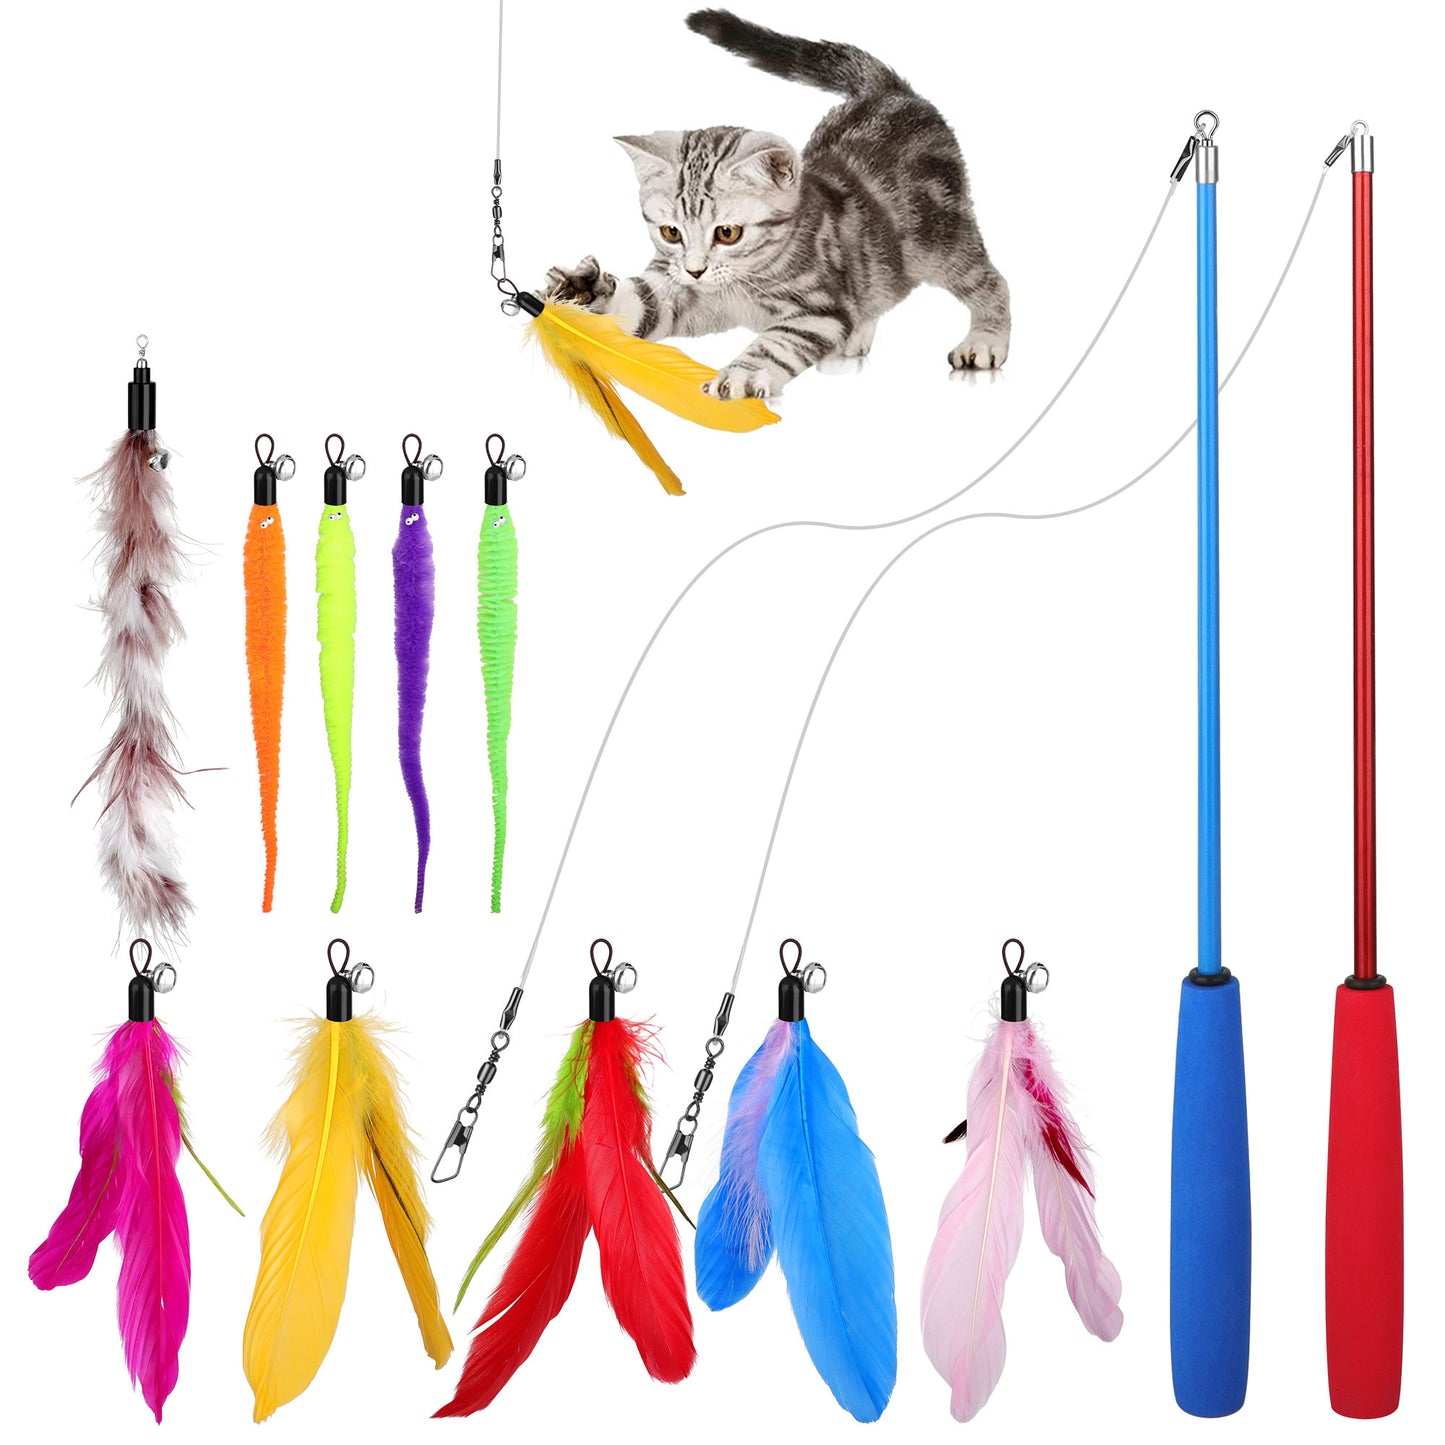 12pcs Interactive Cat Feather Toy Set  - for Playful Kittens withTelescopic Wand,
Artificial Feathers, and Squiggly Worms for Enriching Exercise and Catching Fun